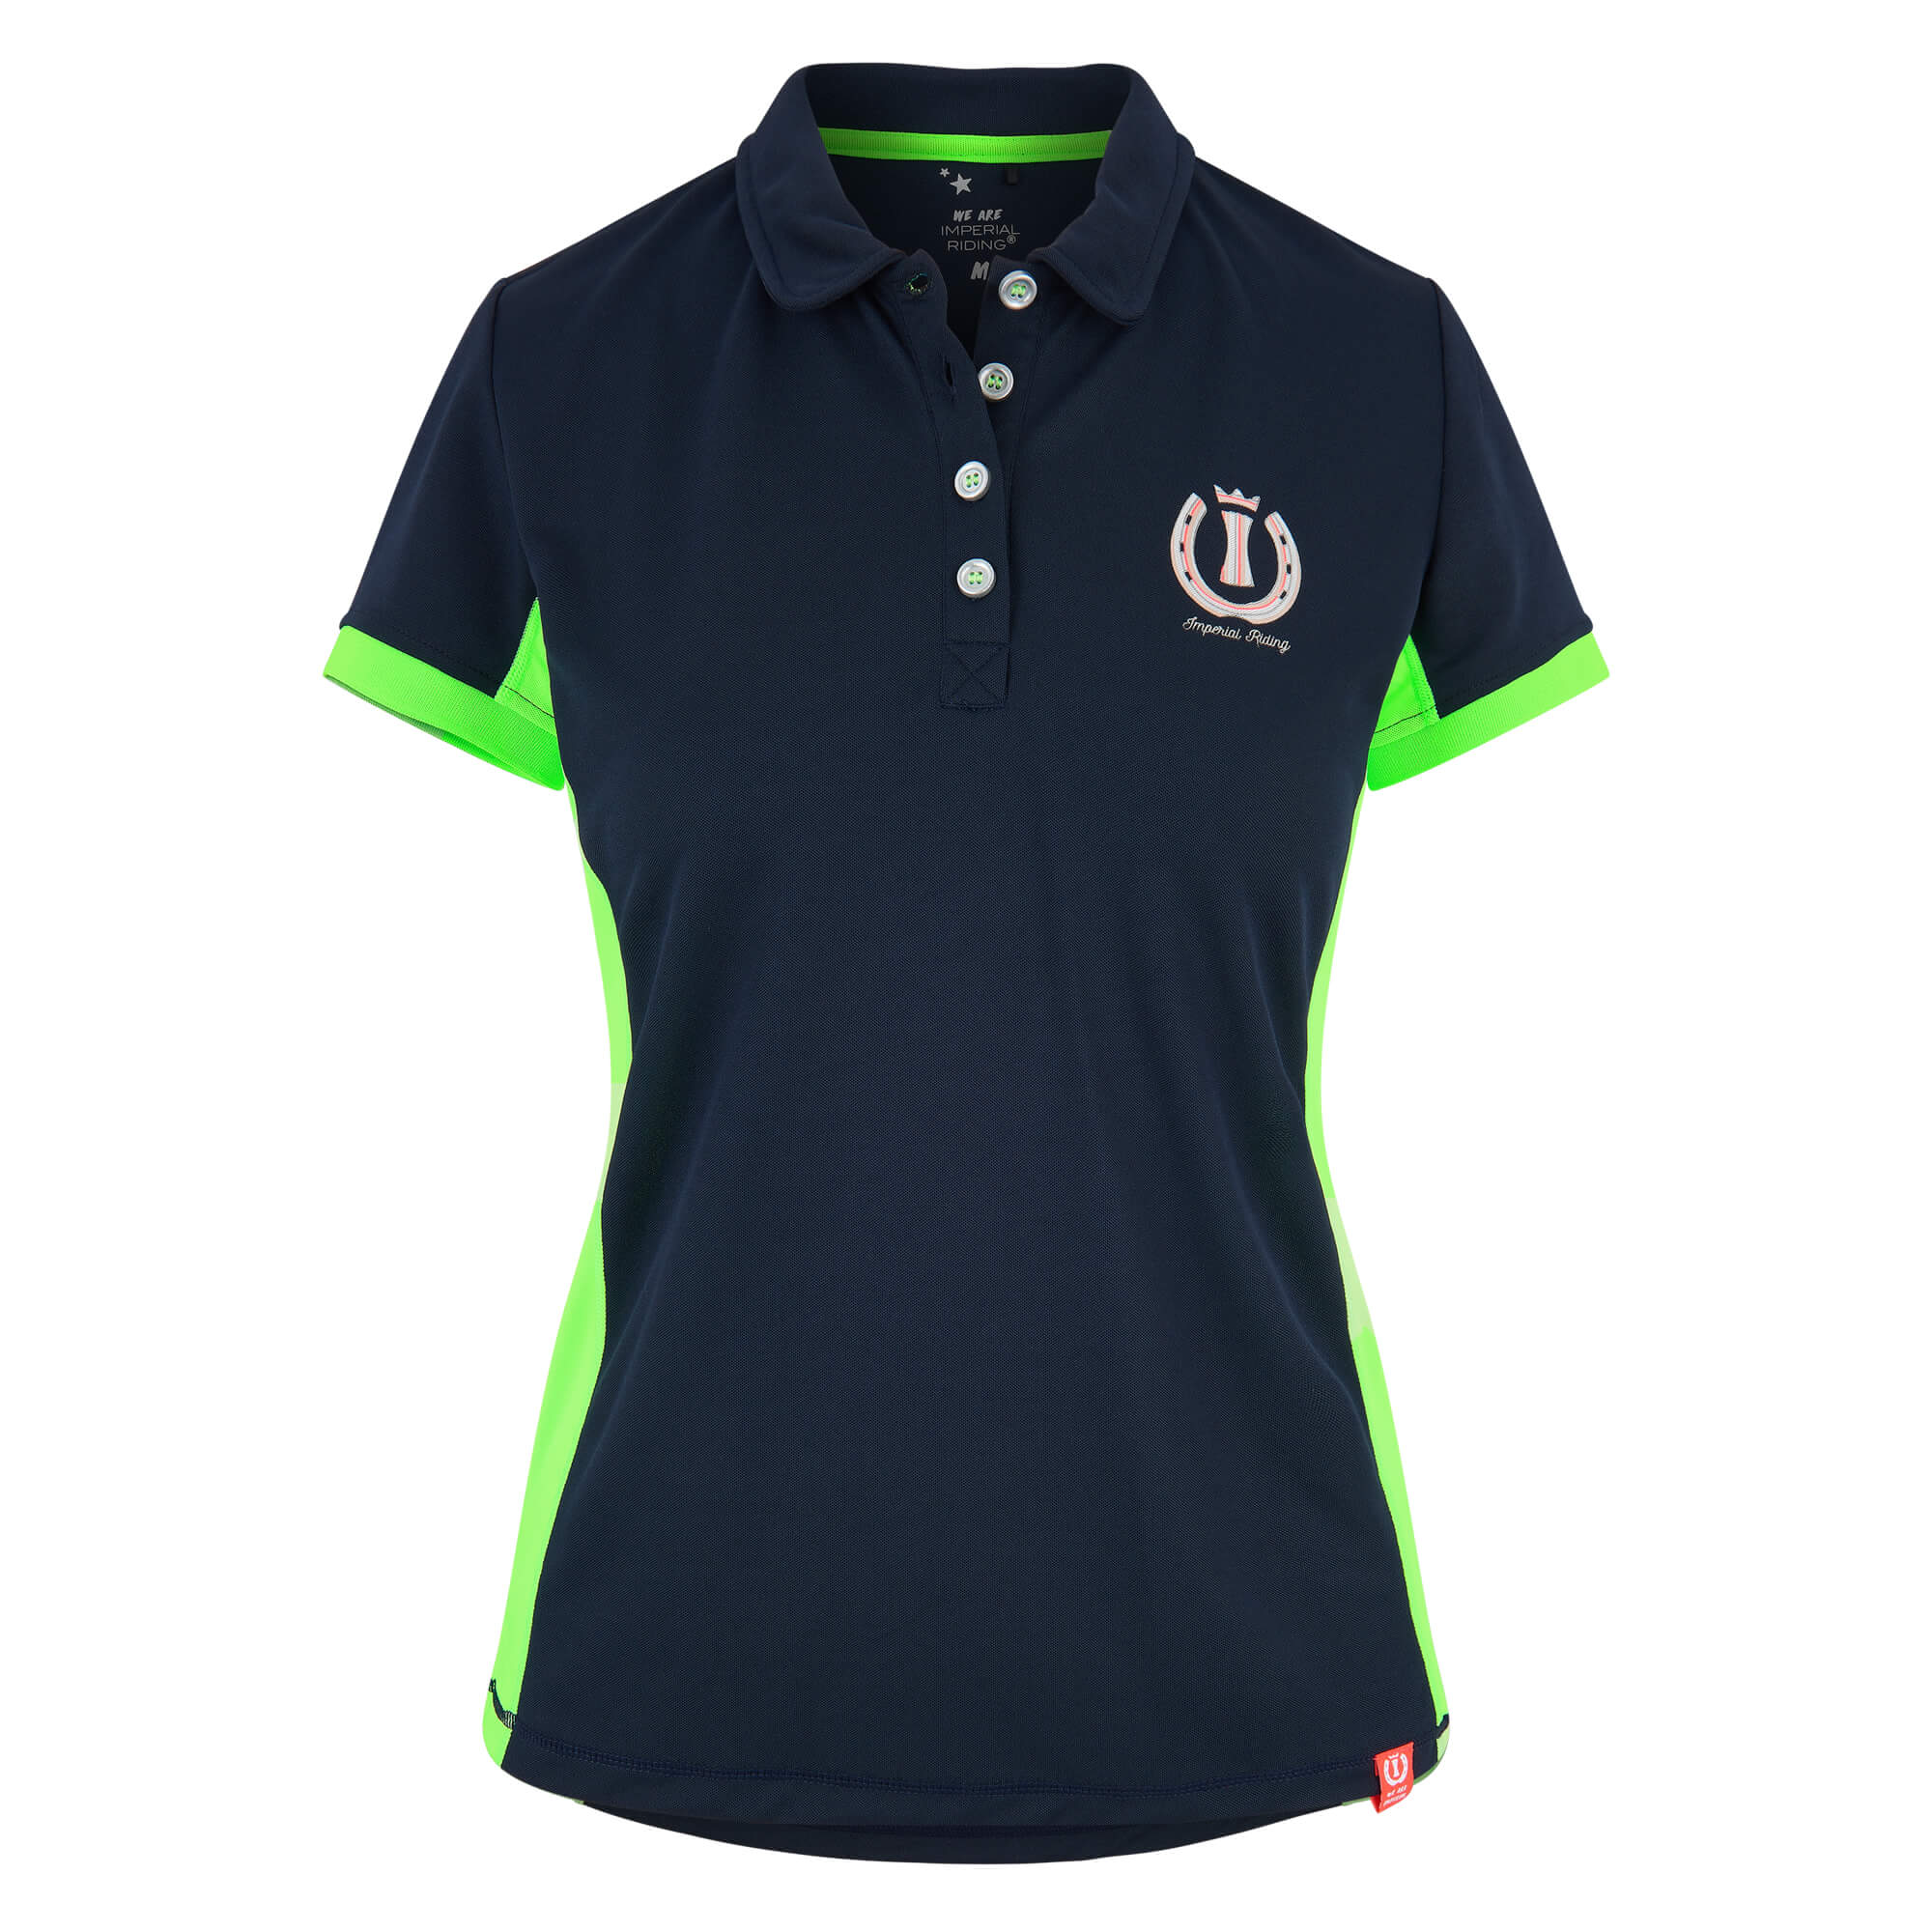 Afbeelding van Imperial Riding Poloshirt irhqueen to be